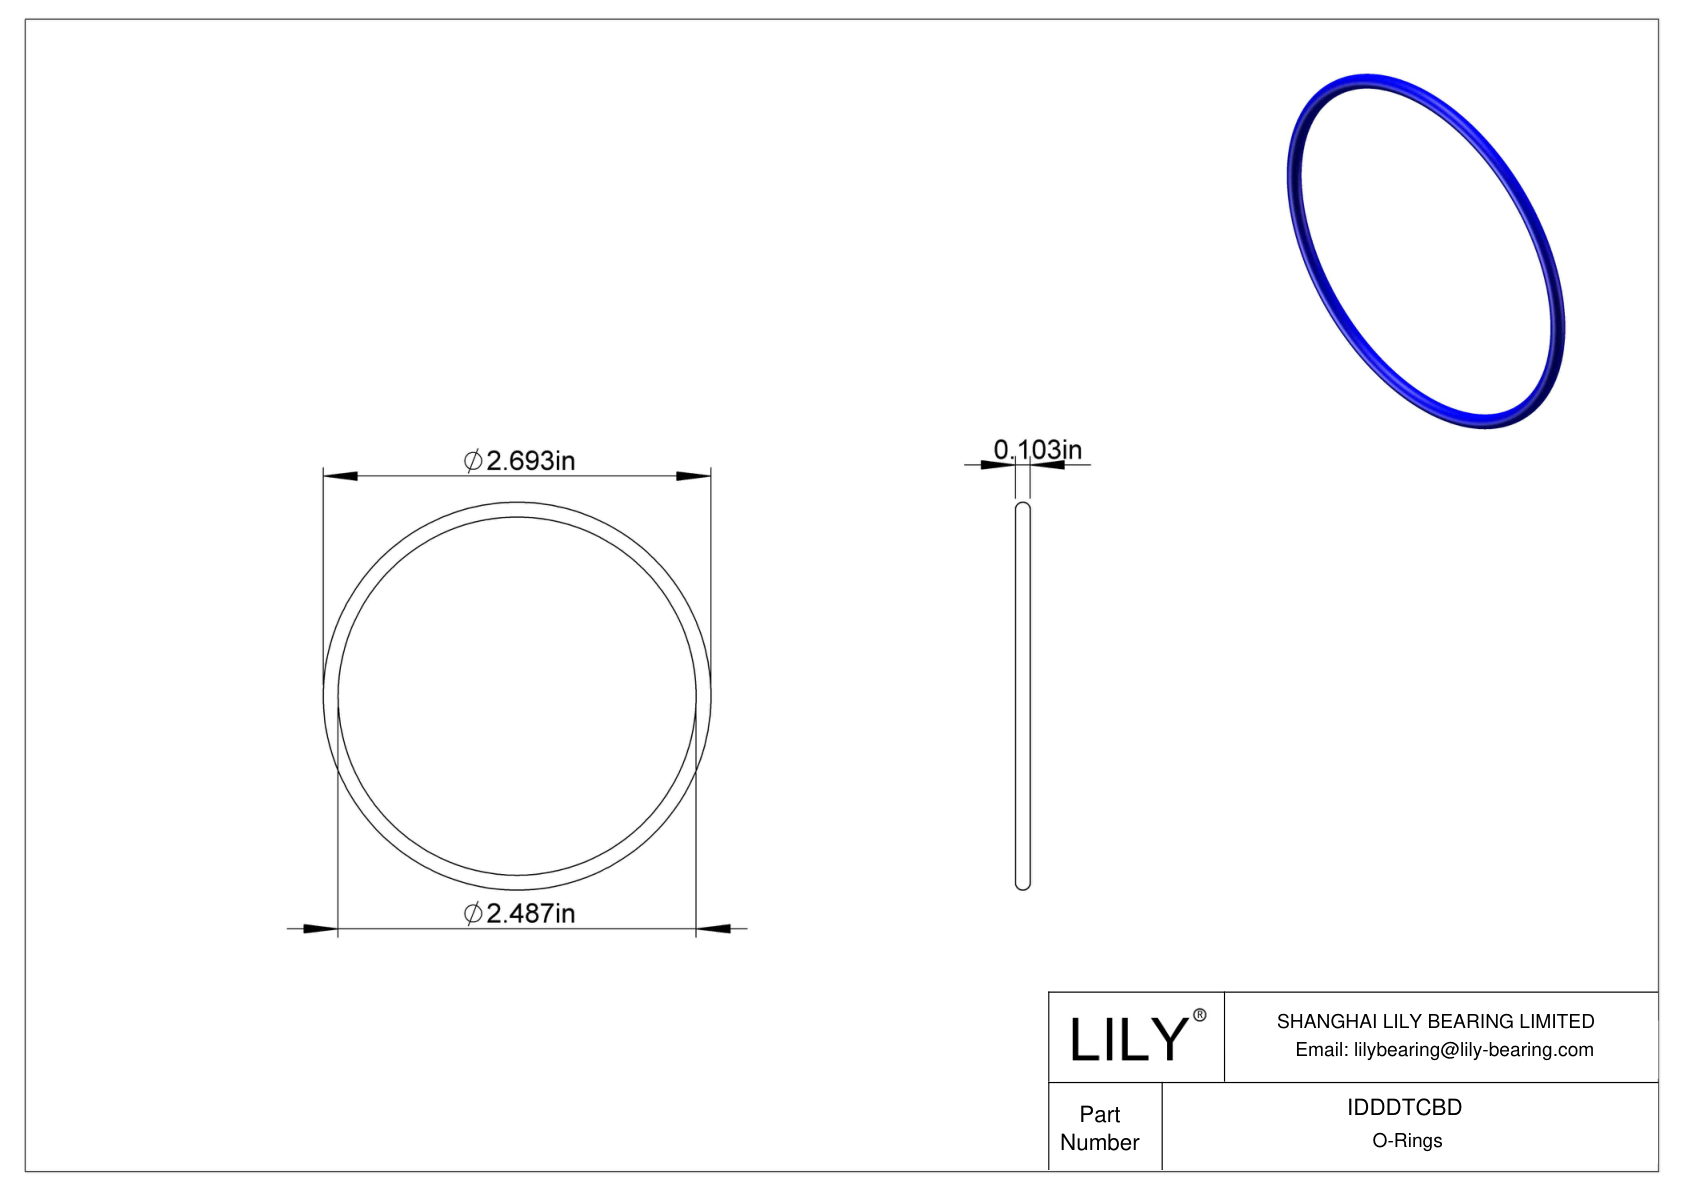 IDDDTCBD Chemical Resistant O-rings Round cad drawing